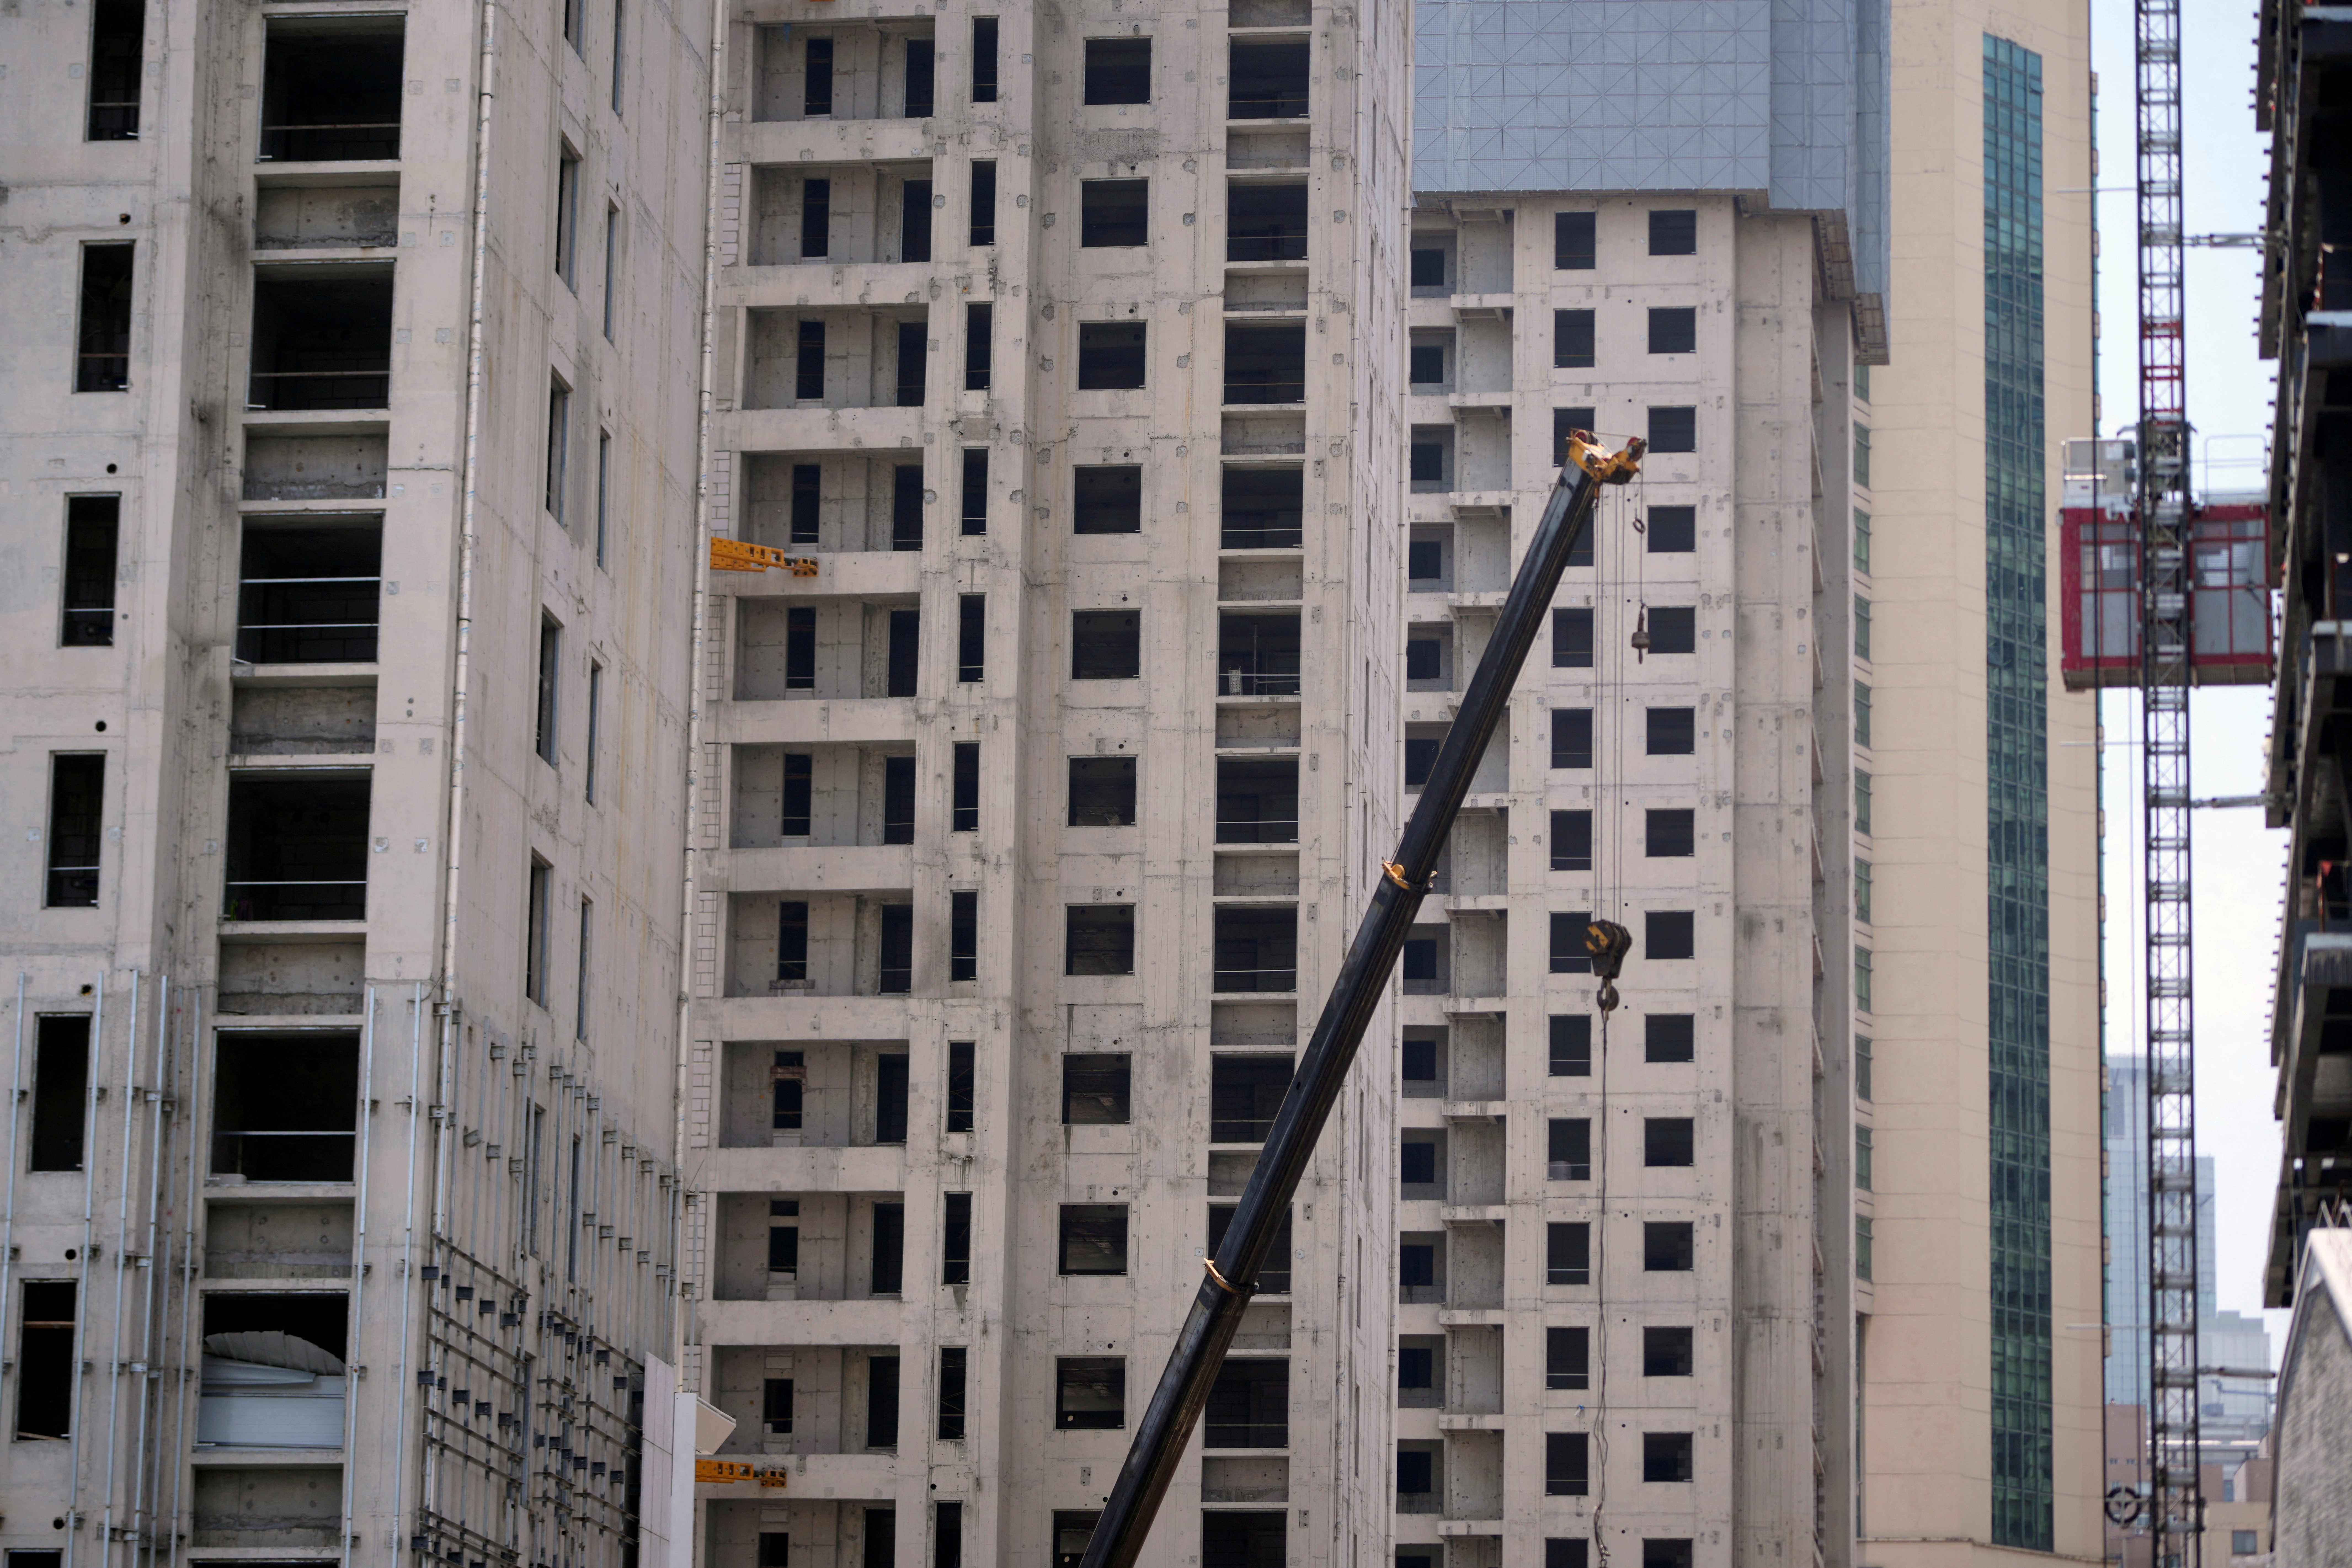 Residential buildings under construction in Shanghai